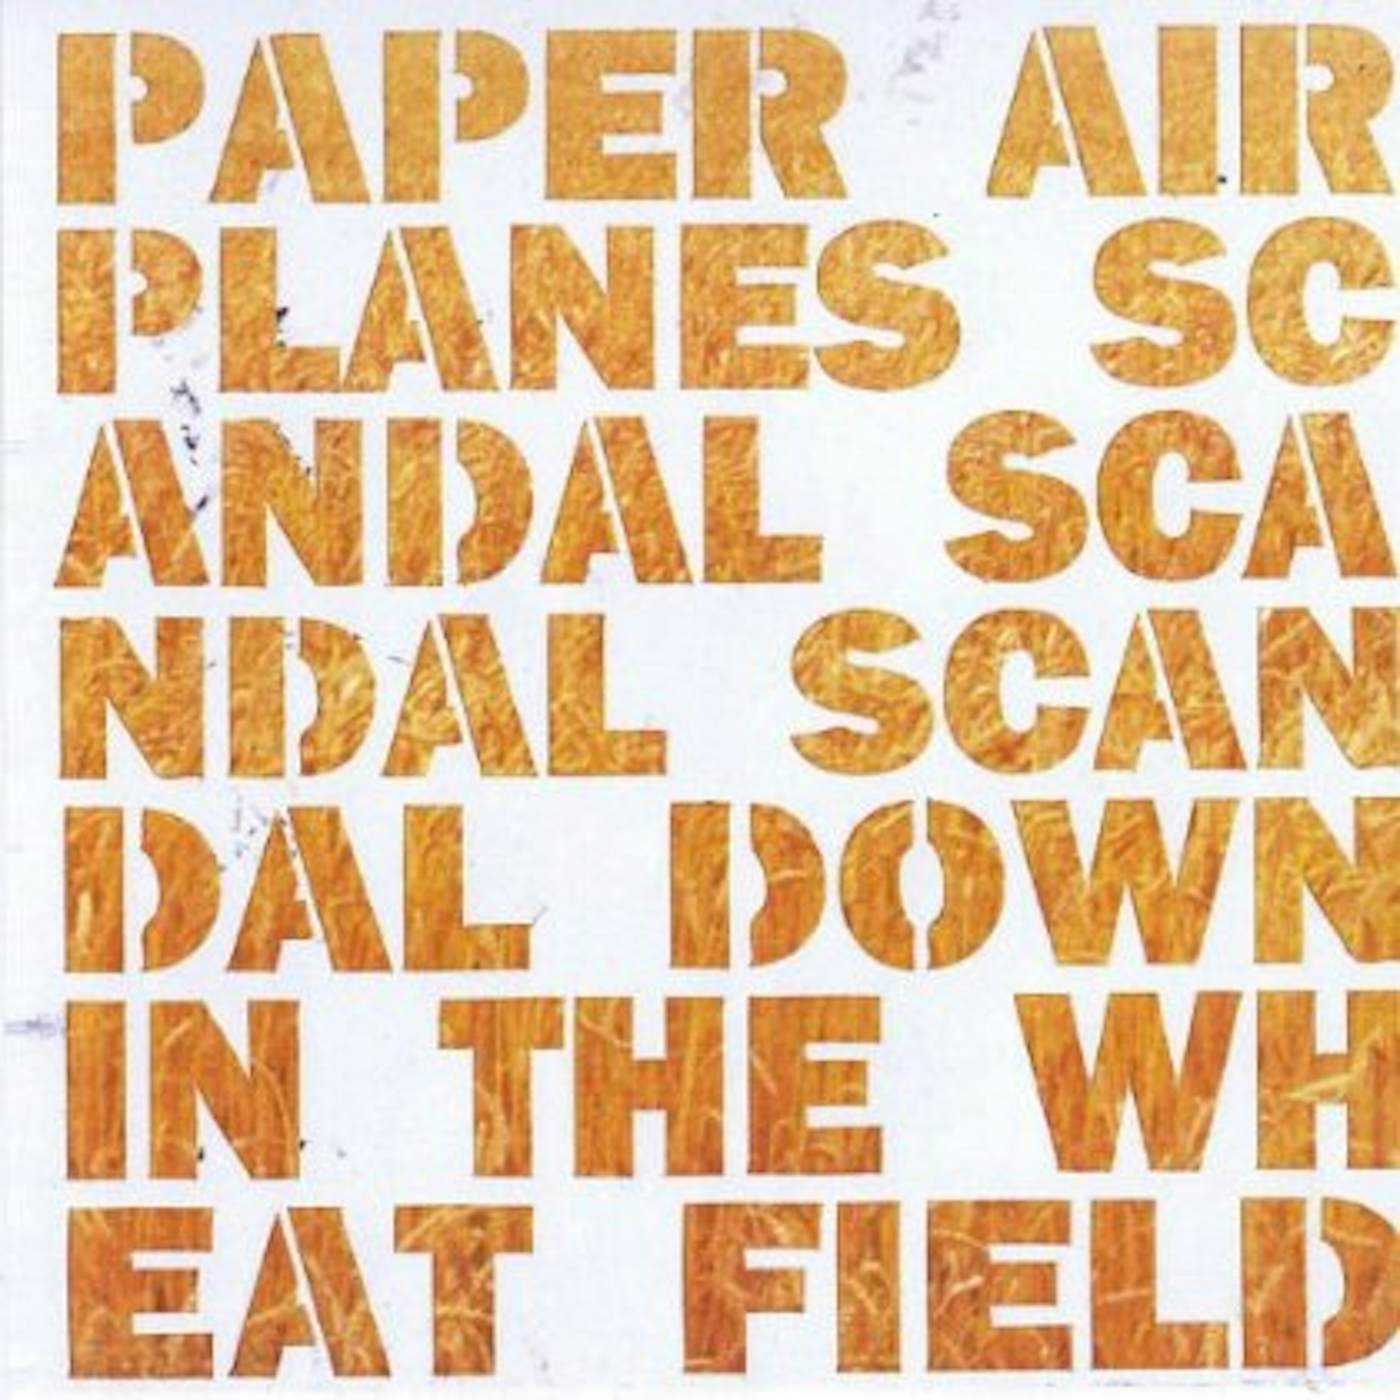 Paper Airplanes SCANDAL SCANDAL SCANDAL DOWN IN THE WHEAT FIELD CD